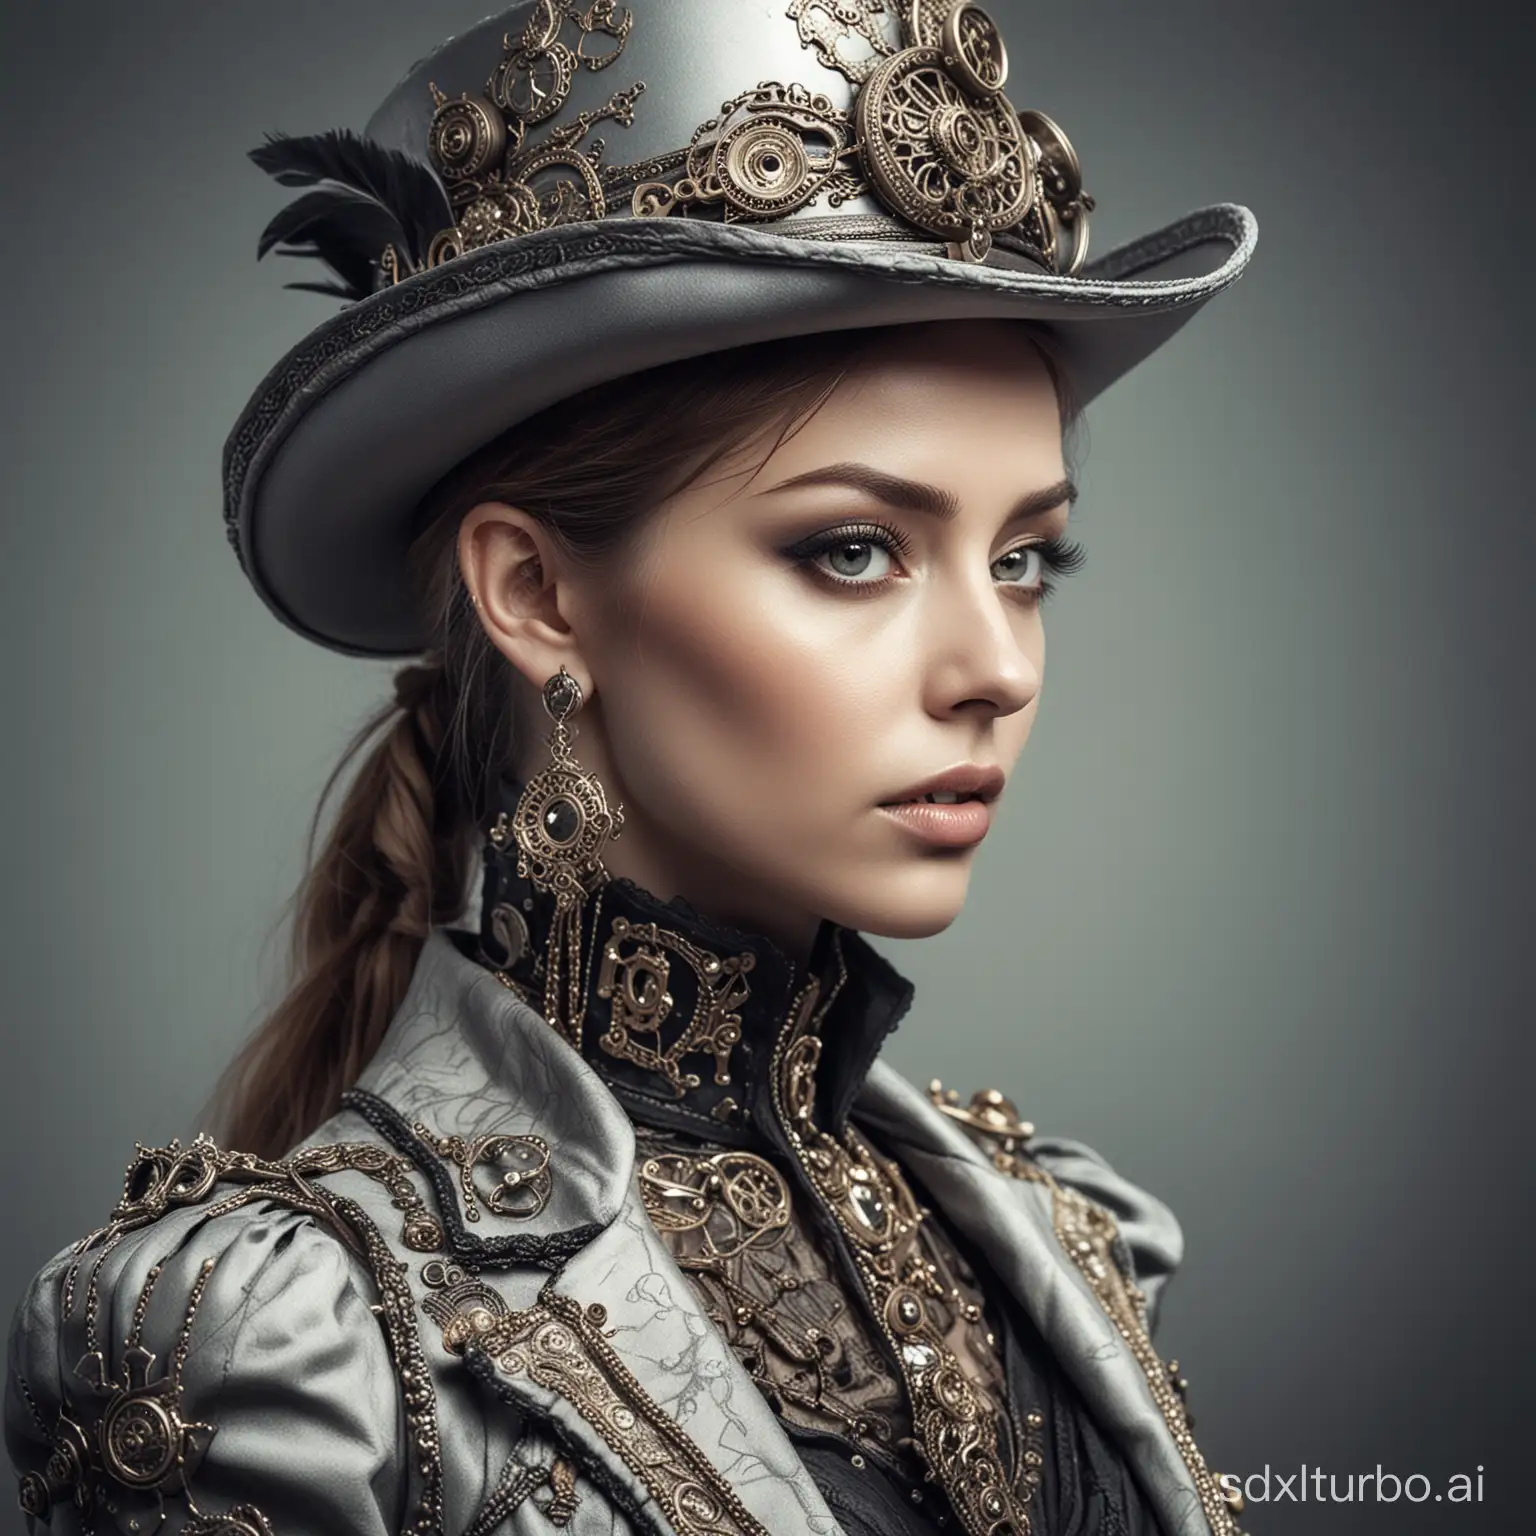 woman in jacet and hat, low color, high key, baroque style, extremly detailed, small metal parts, steampunk style, gothic style